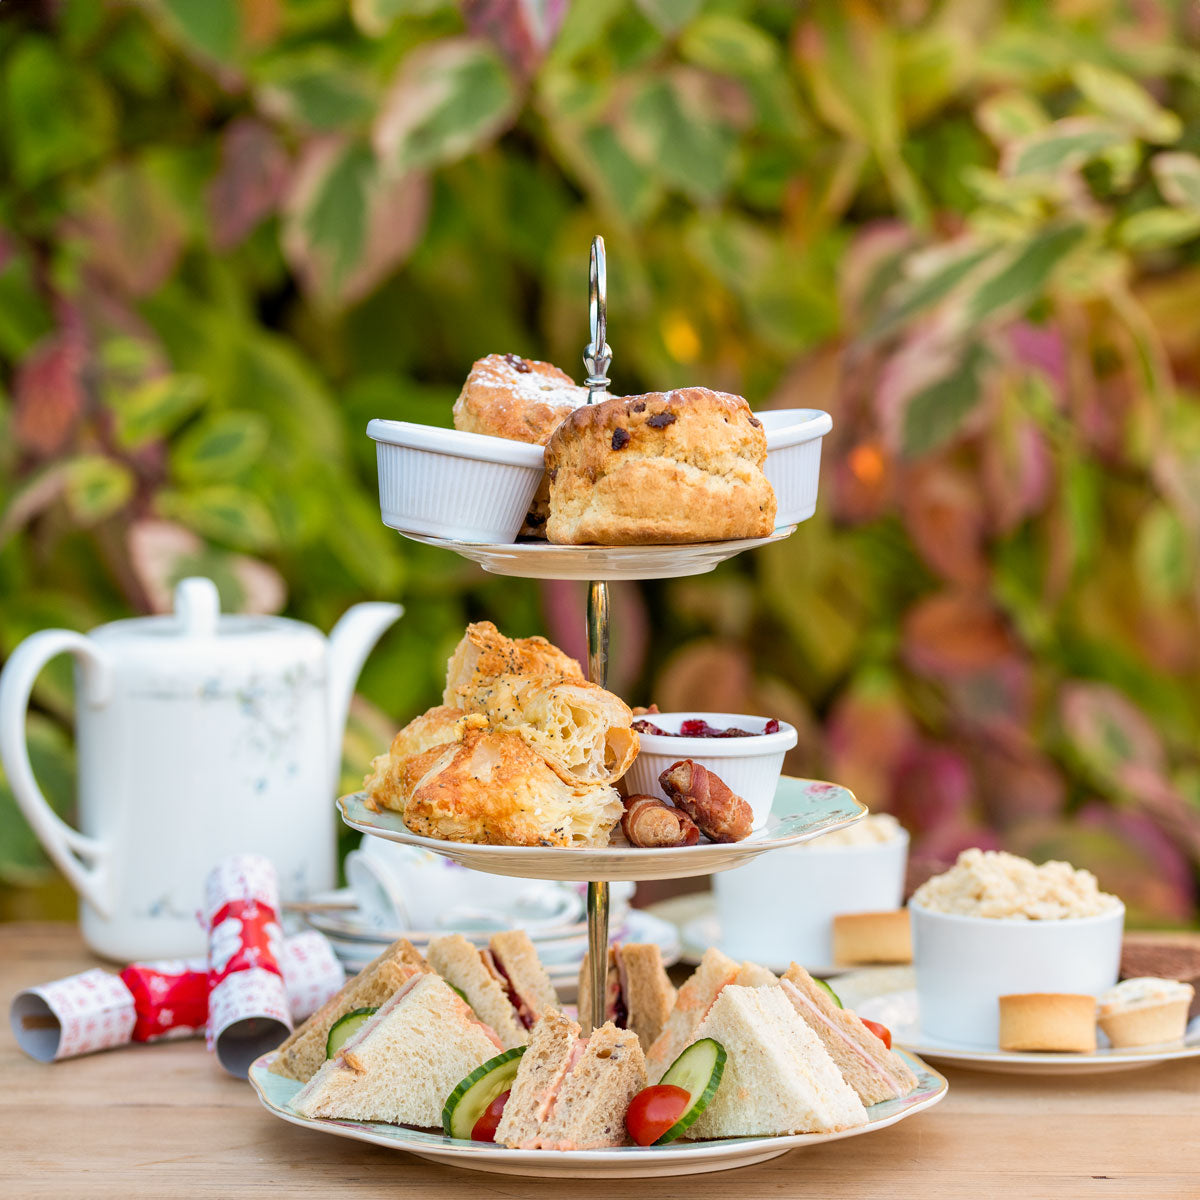 Christmas Afternoon Tea from the Helenium Tea Room at Barnsdale Gardens